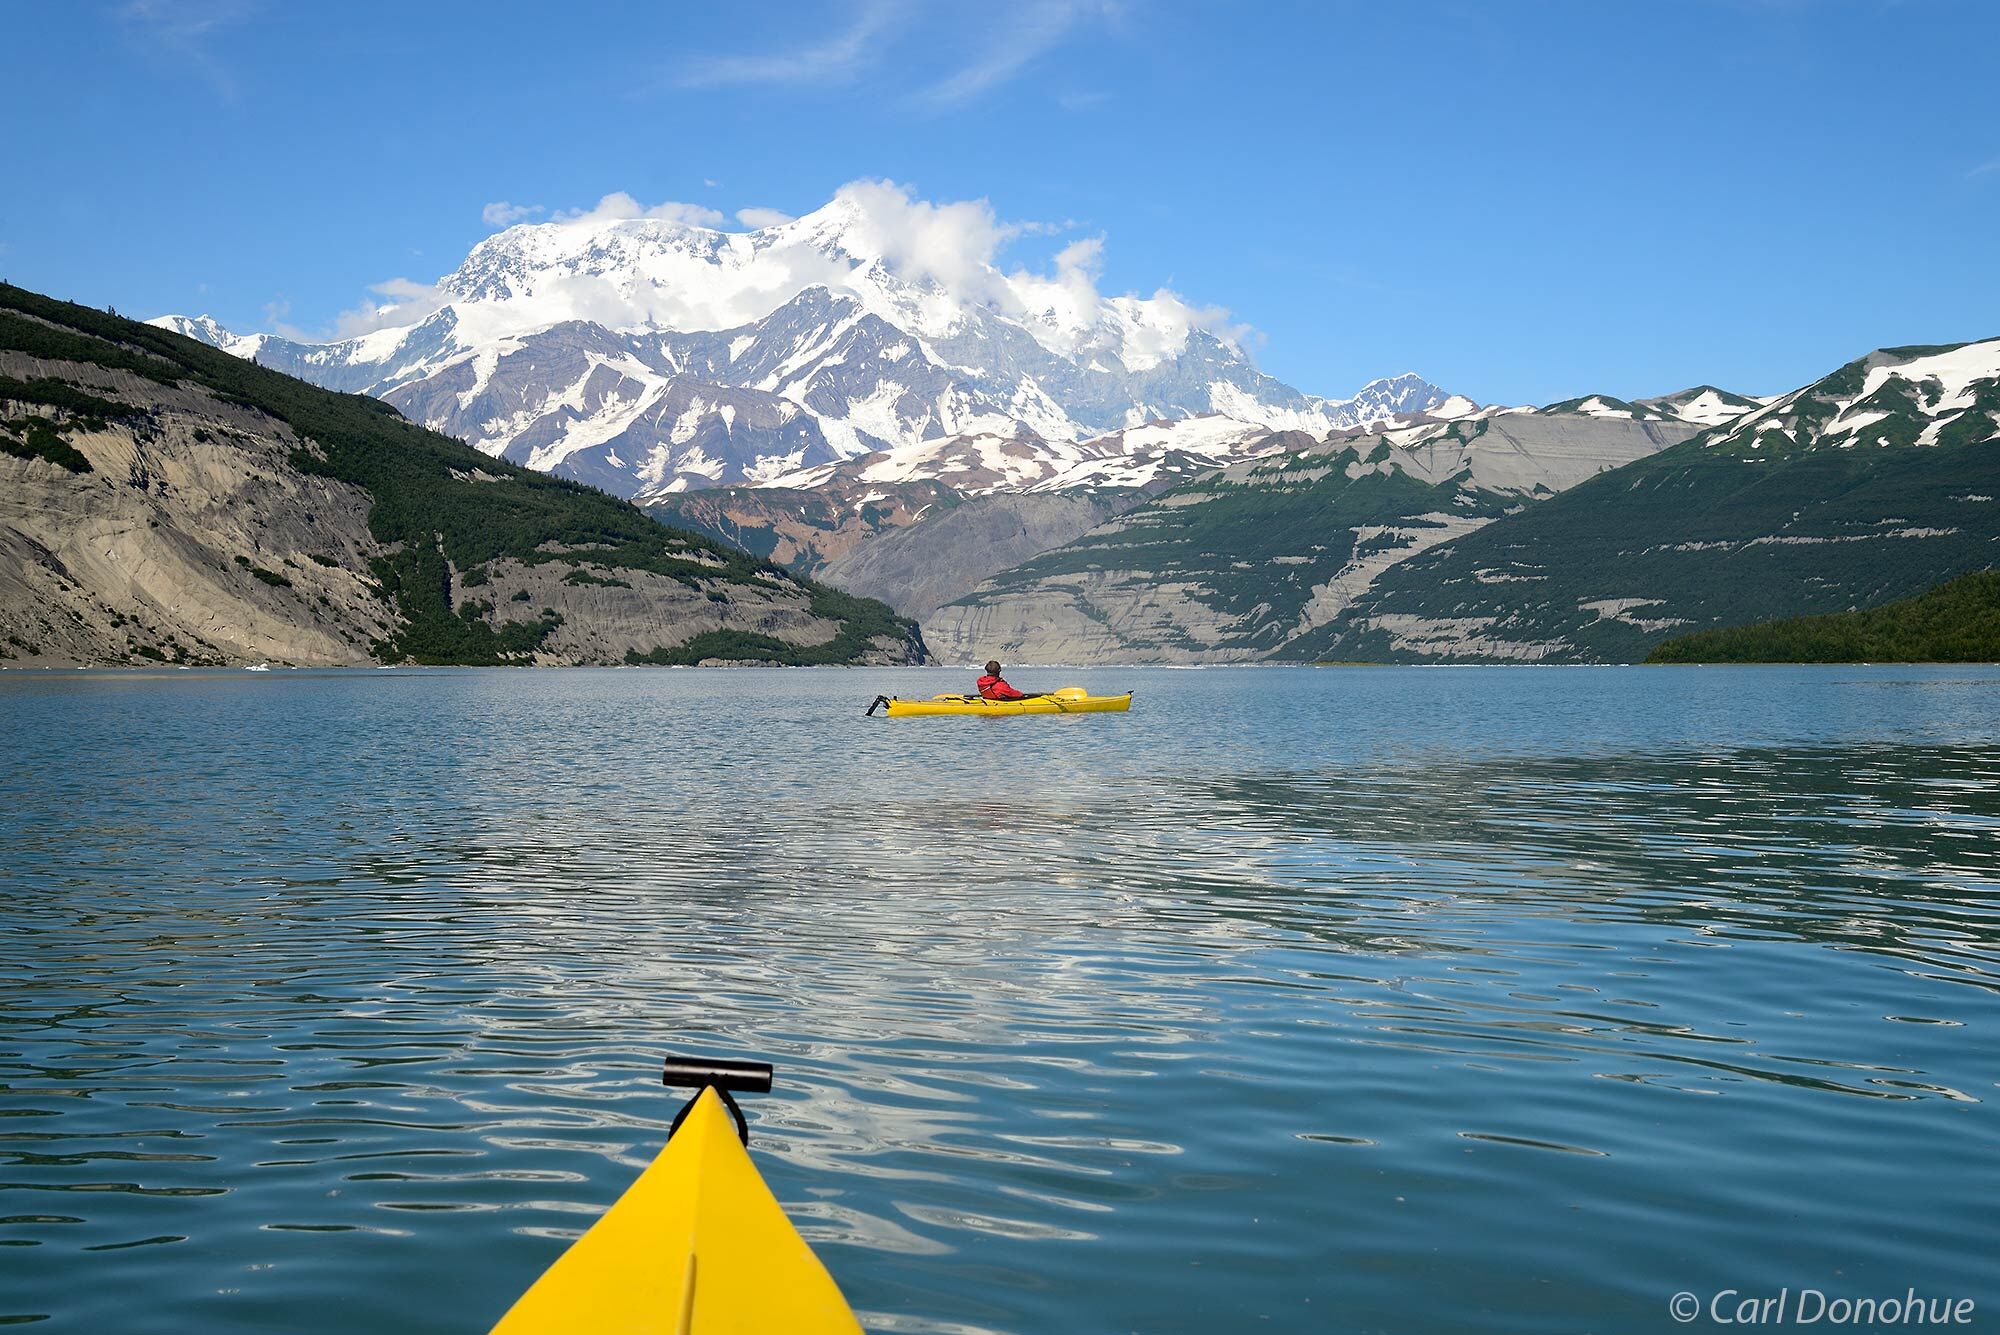 A photo of a young man sea kayaking in Icy Bay under the towering Mt. St. Elias. Paddling under the world's highest coastal mountain...